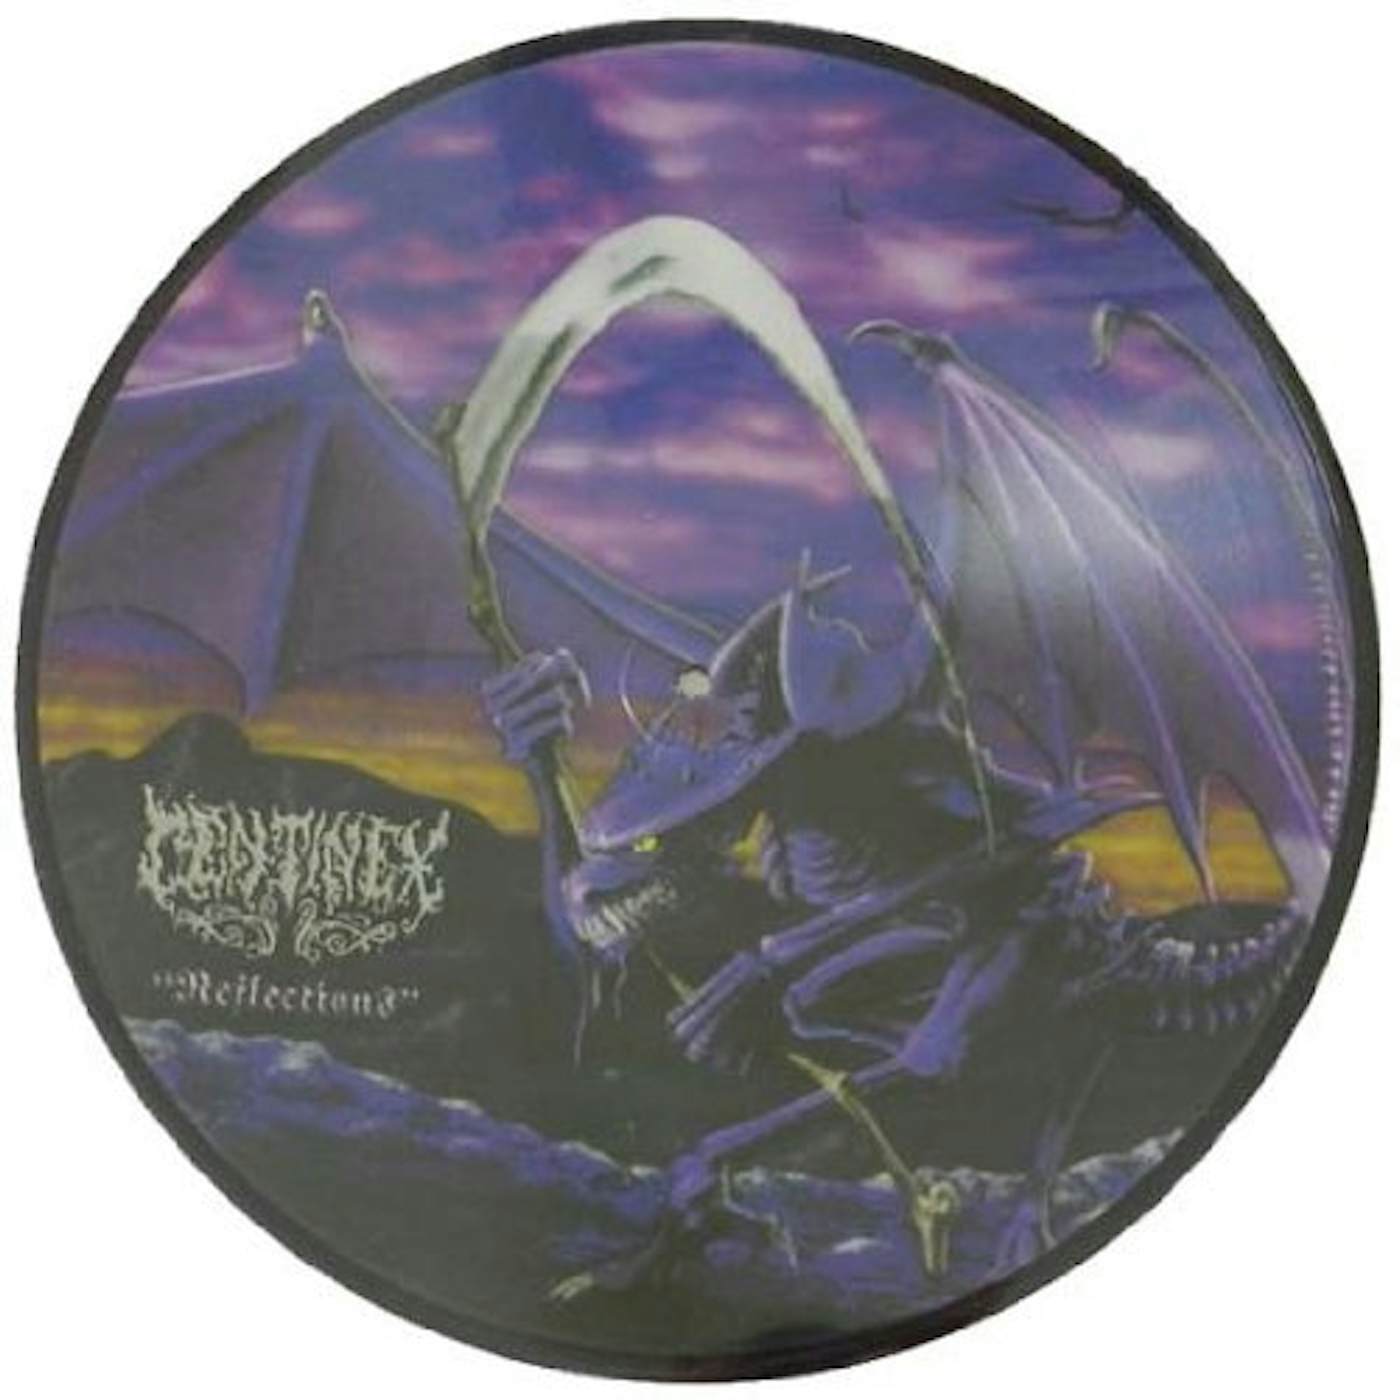 Centinex REFLECTIONS (PICTURE DISC) Vinyl Record